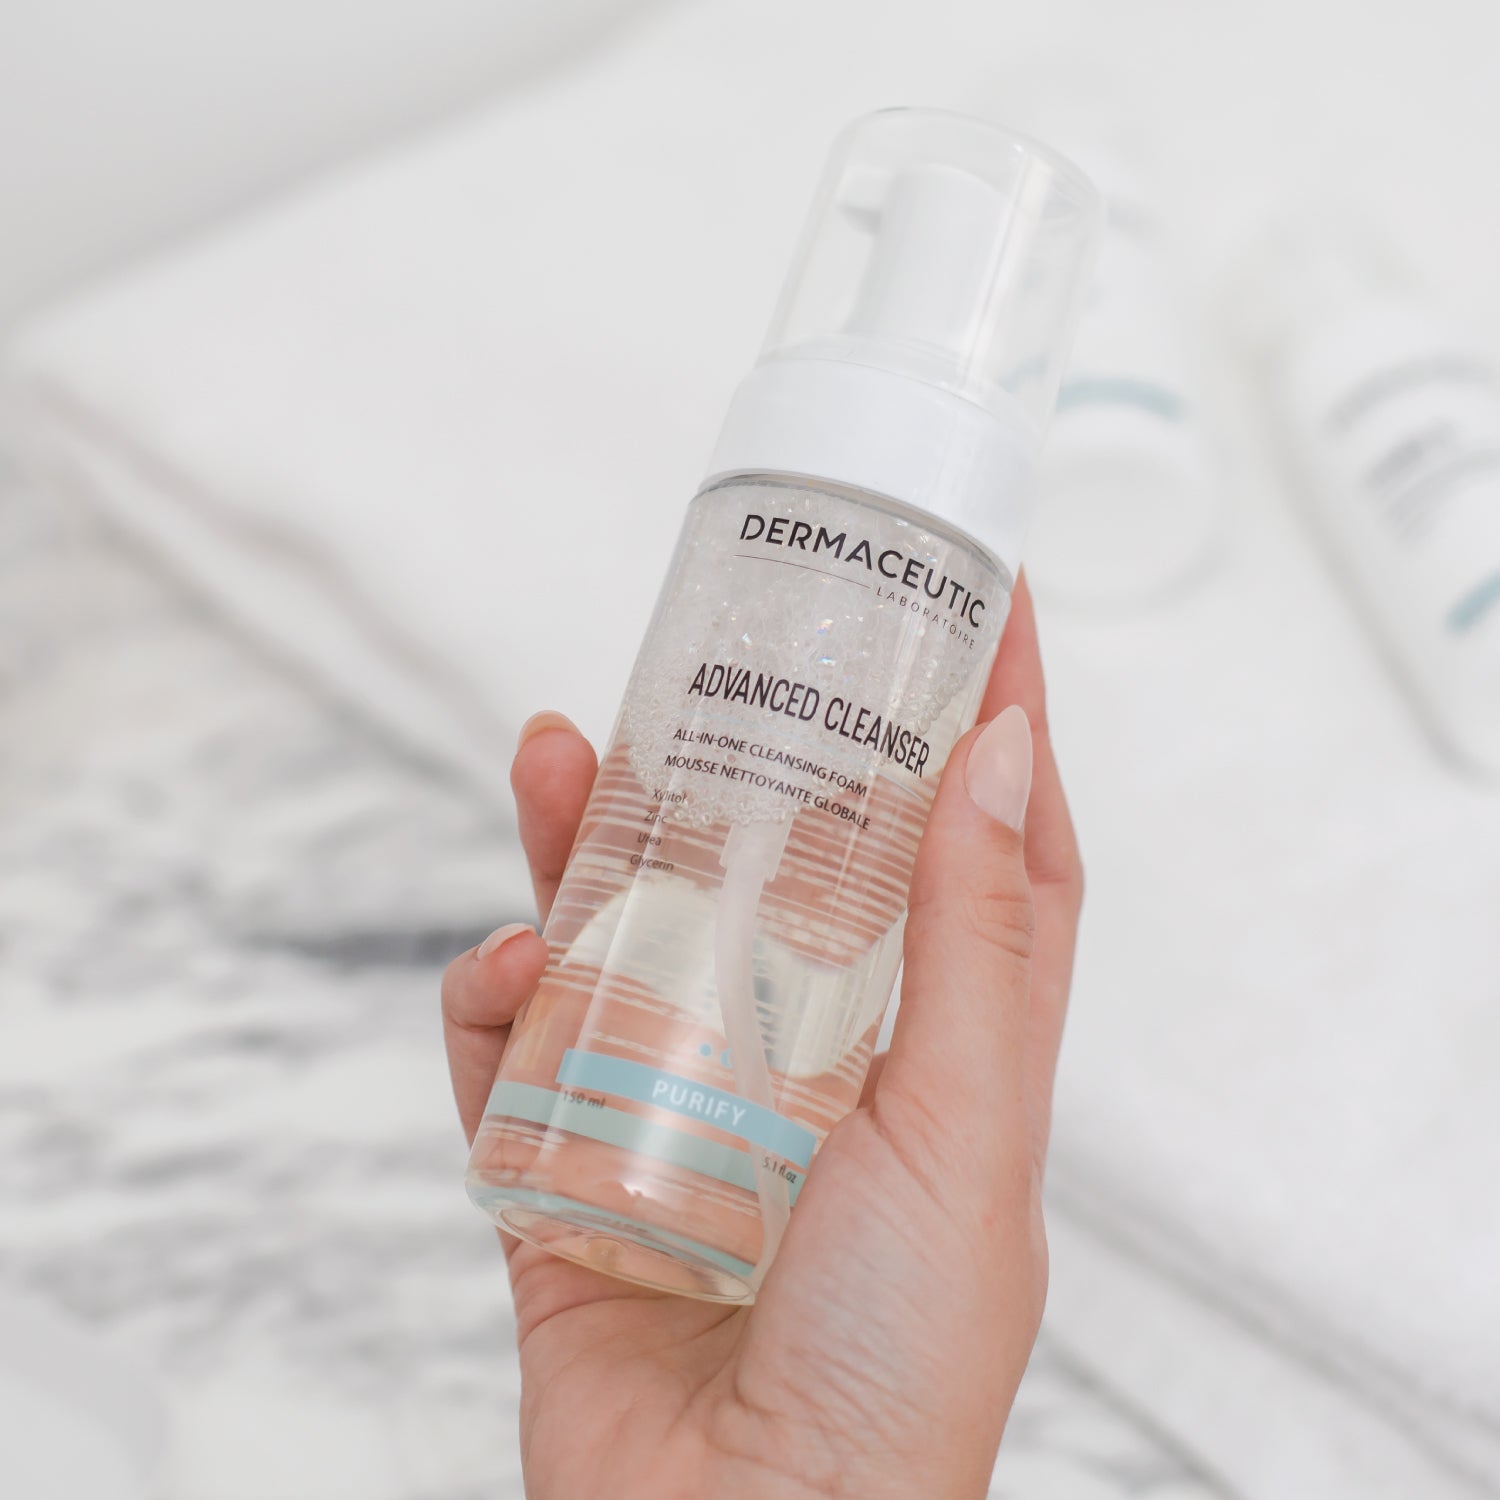 Dermaceutic Advanced Cleanser - All in one cleansing foam